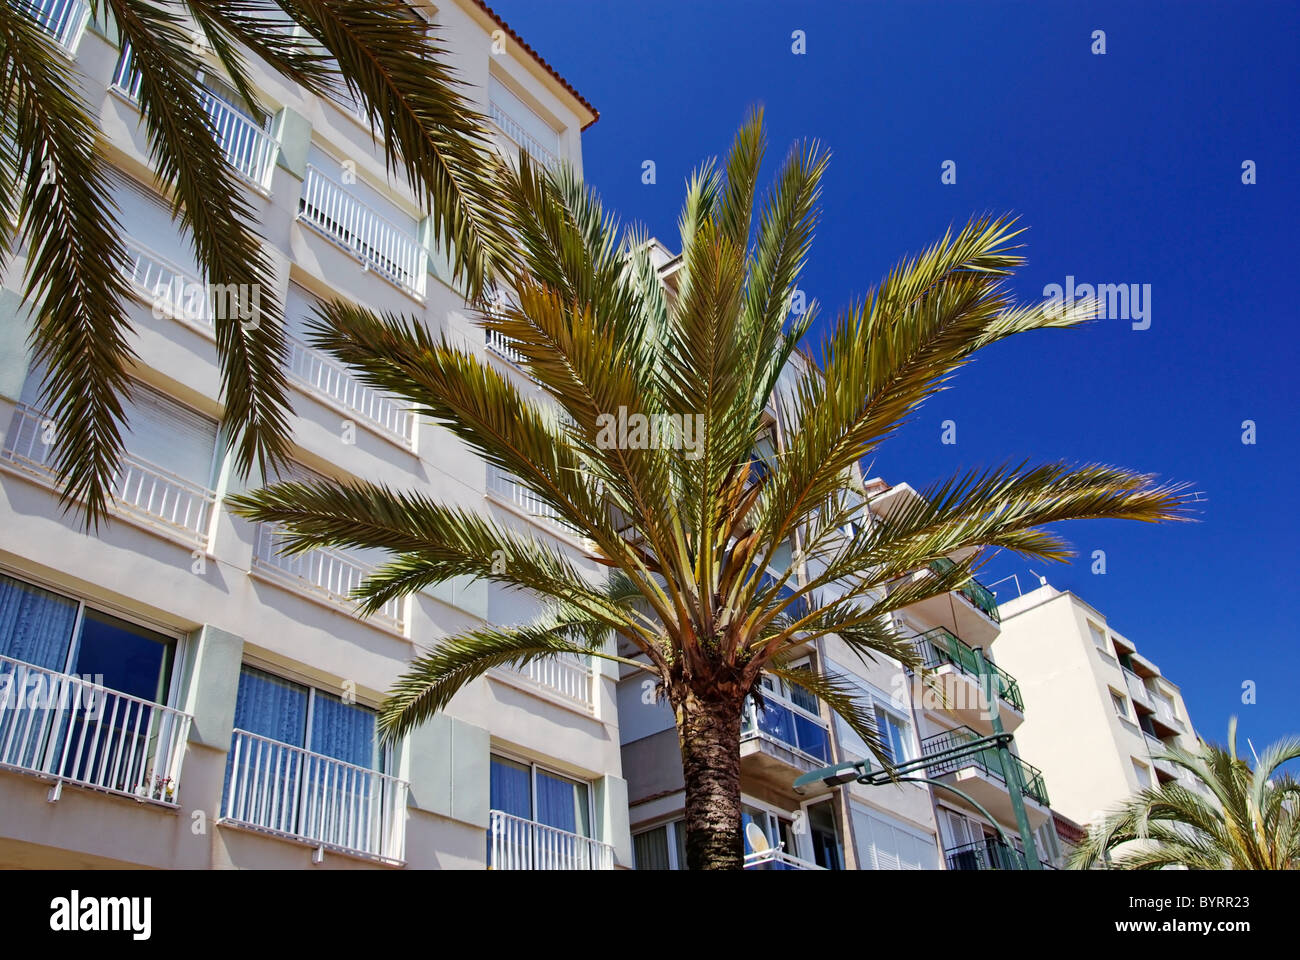 Green palms, hotels and luxury apartments in Lloret de Mar, Spain. Stock Photo